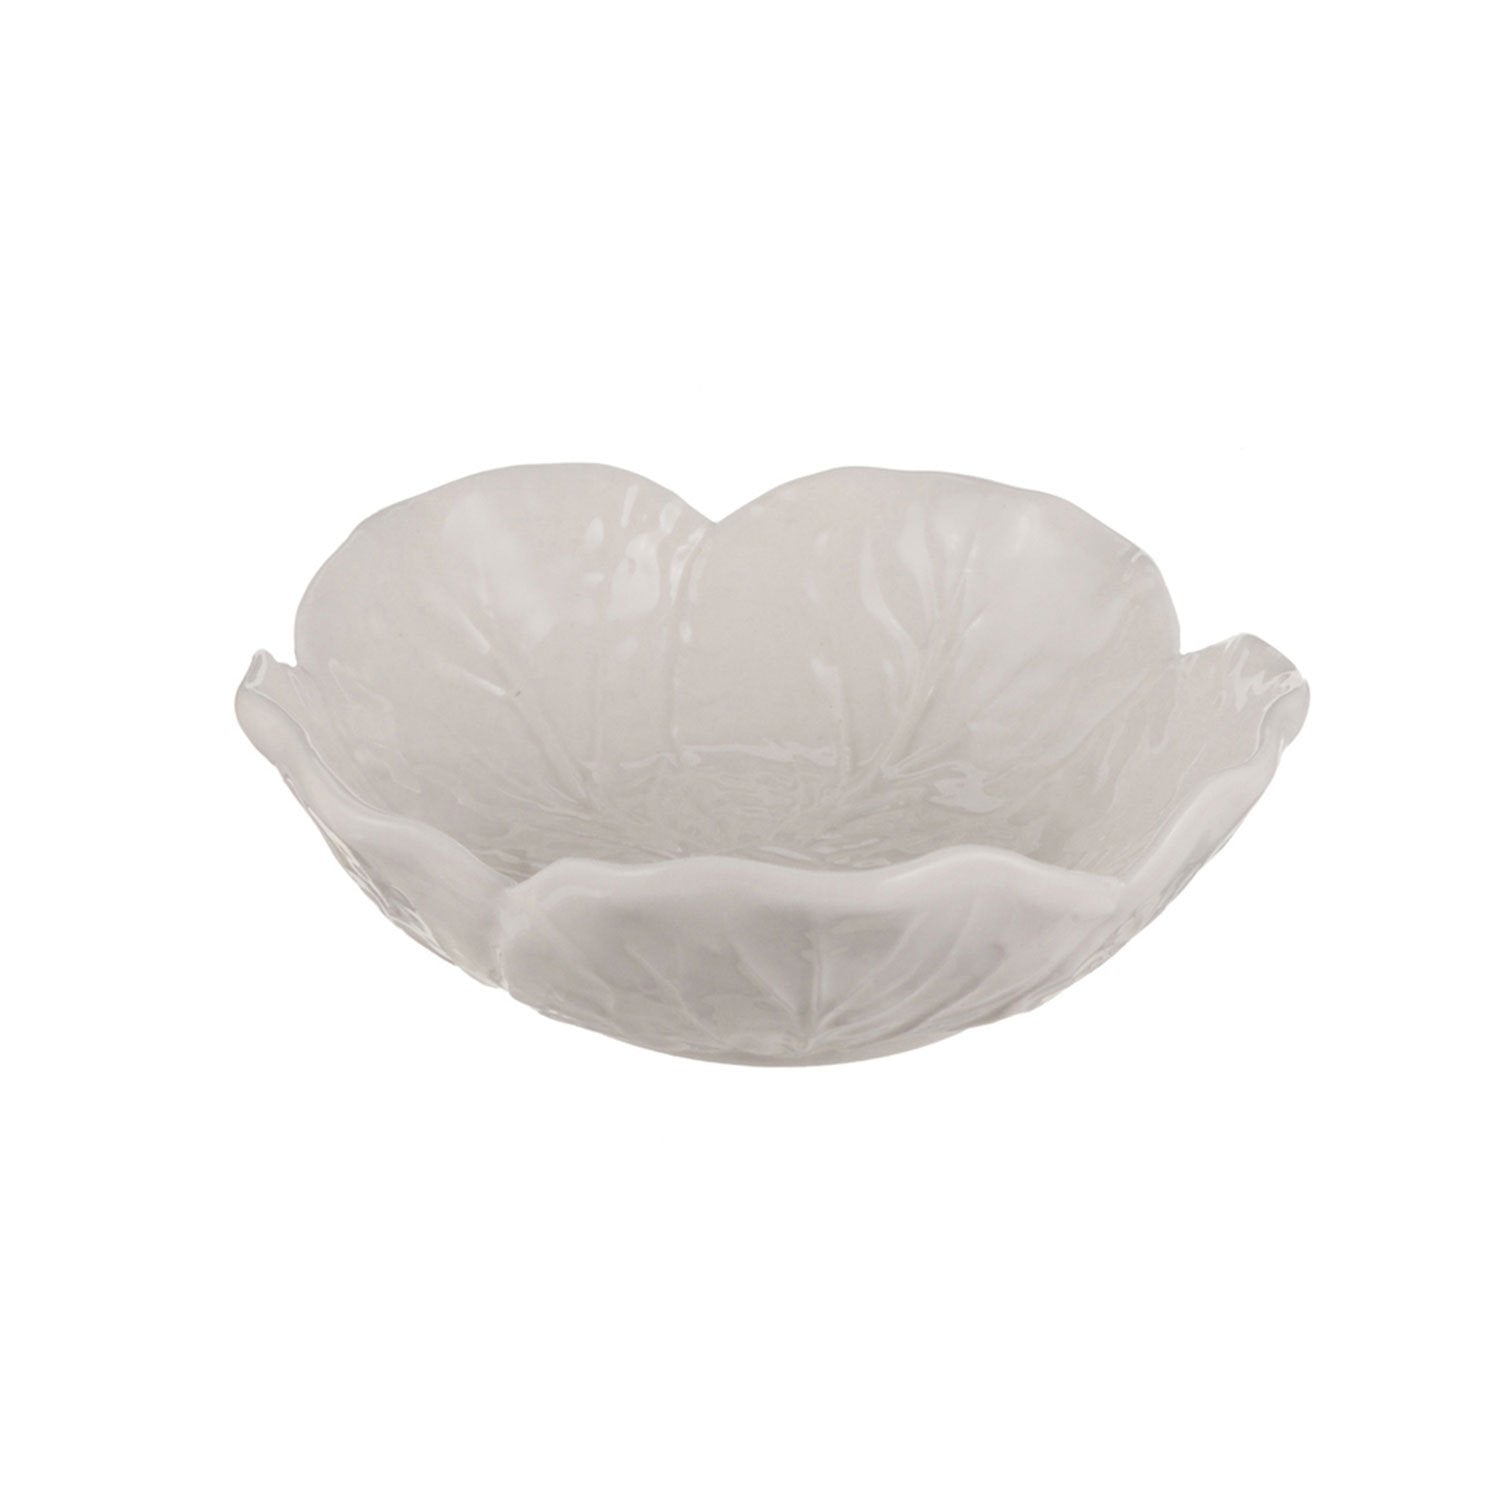 Cabbage Bowl - Small Ivory 12cm